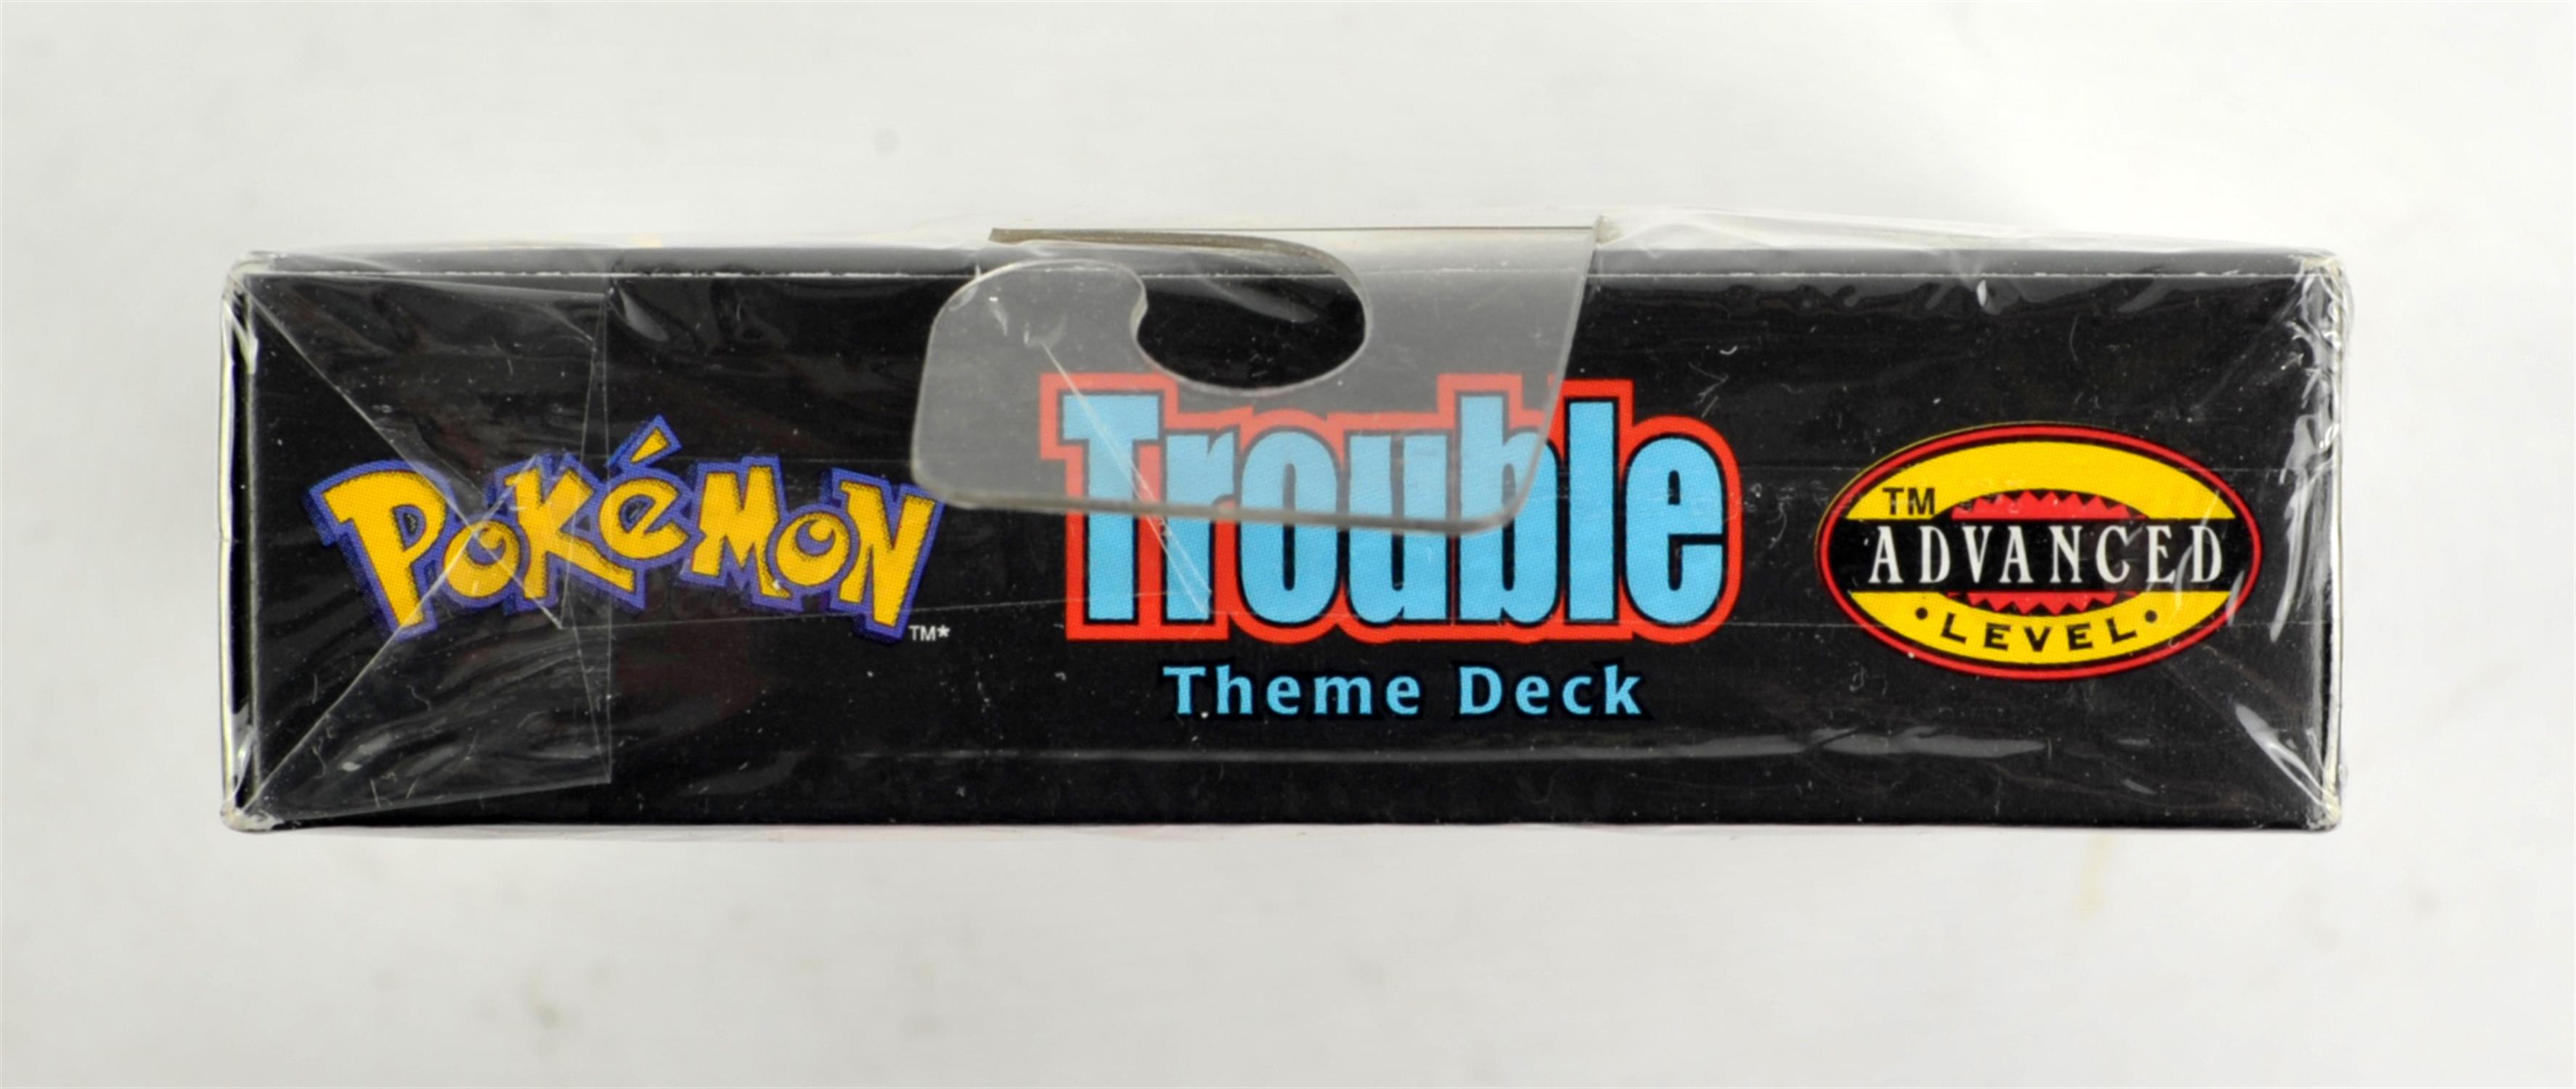 Pokemon TCG. Team Rocket Trouble Theme Deck, Sealed. Deck is in excellent condition, seal intact, - Image 5 of 6